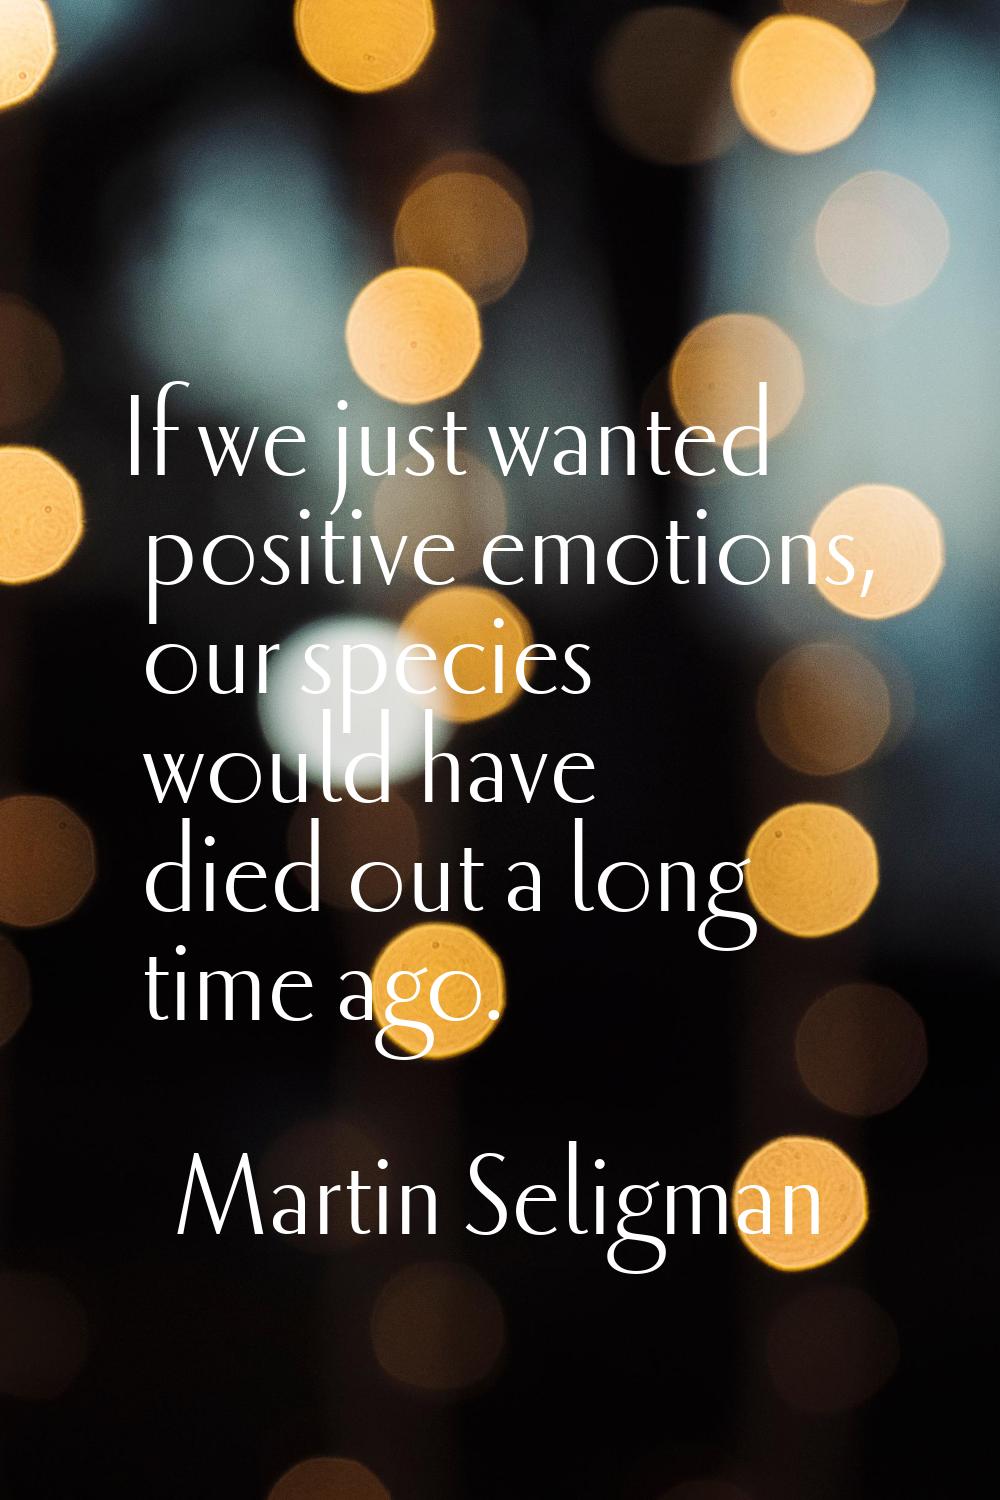 If we just wanted positive emotions, our species would have died out a long time ago.